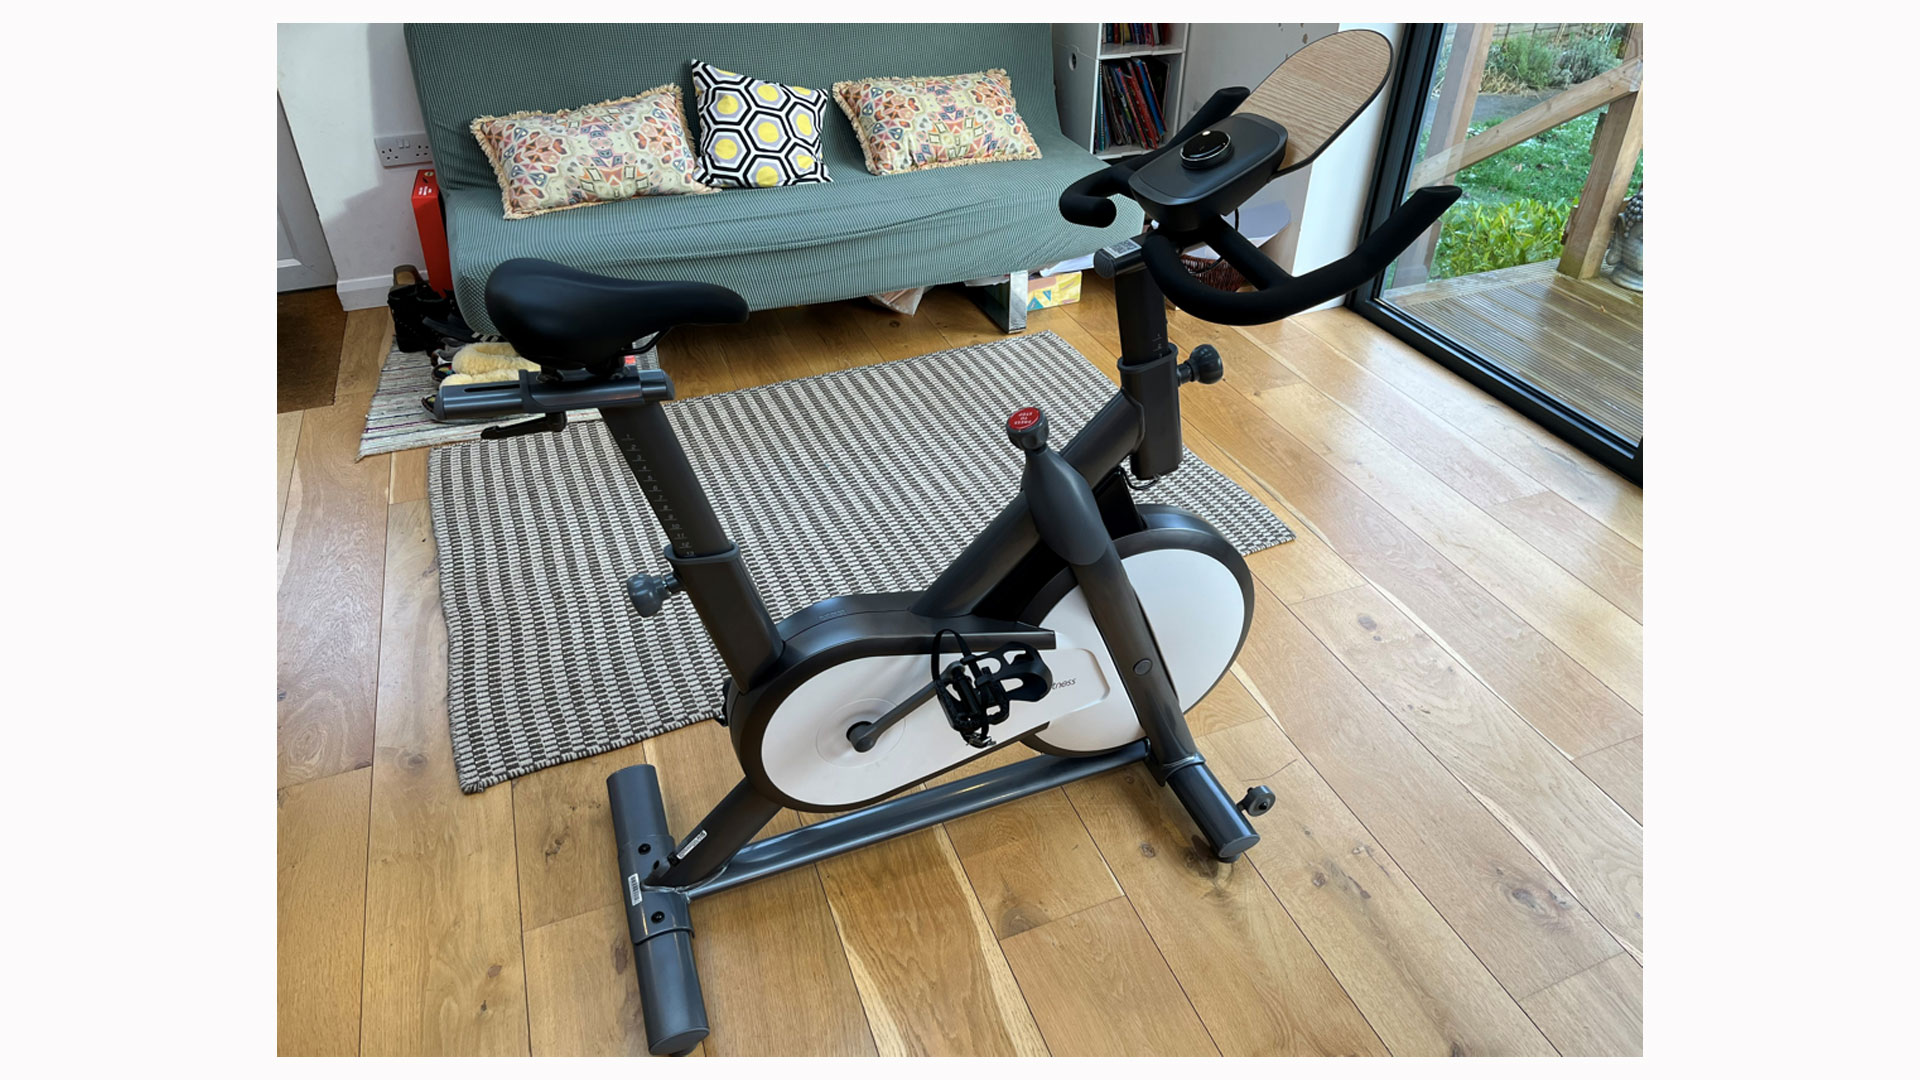 The image shows a side view of the Moby Turbo exercise bike.